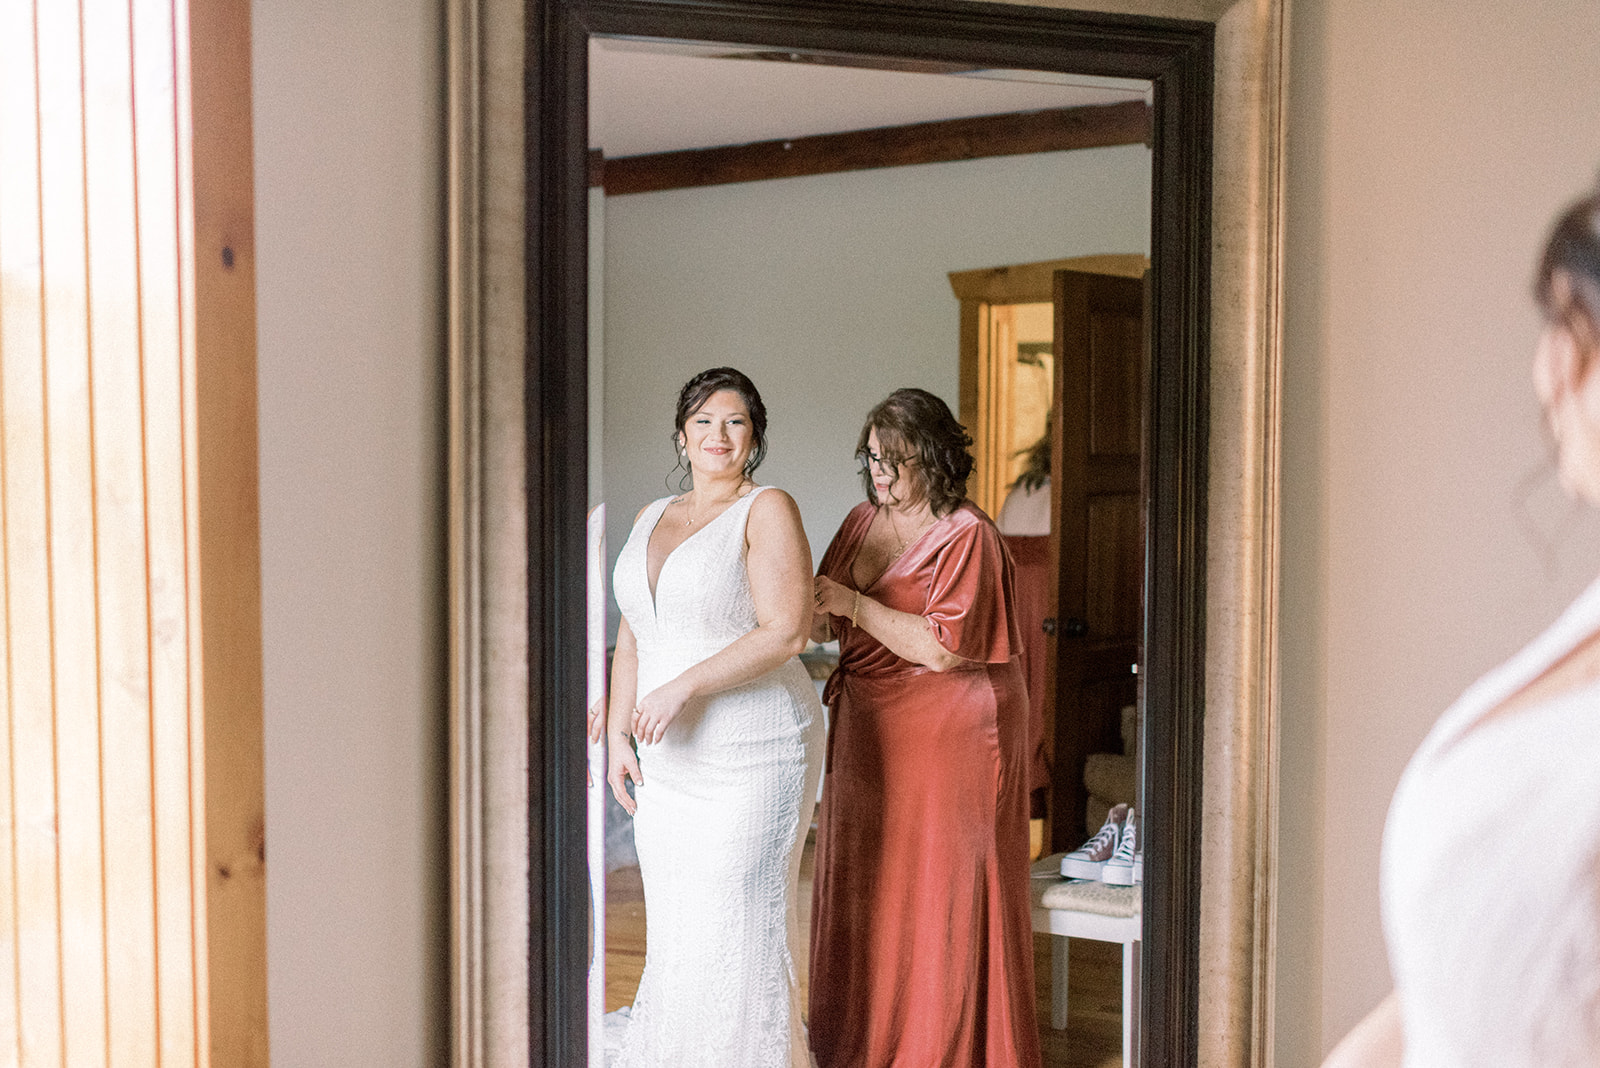 Pennsylvania wedding photographer captures bride smiling while mother helps her into dress